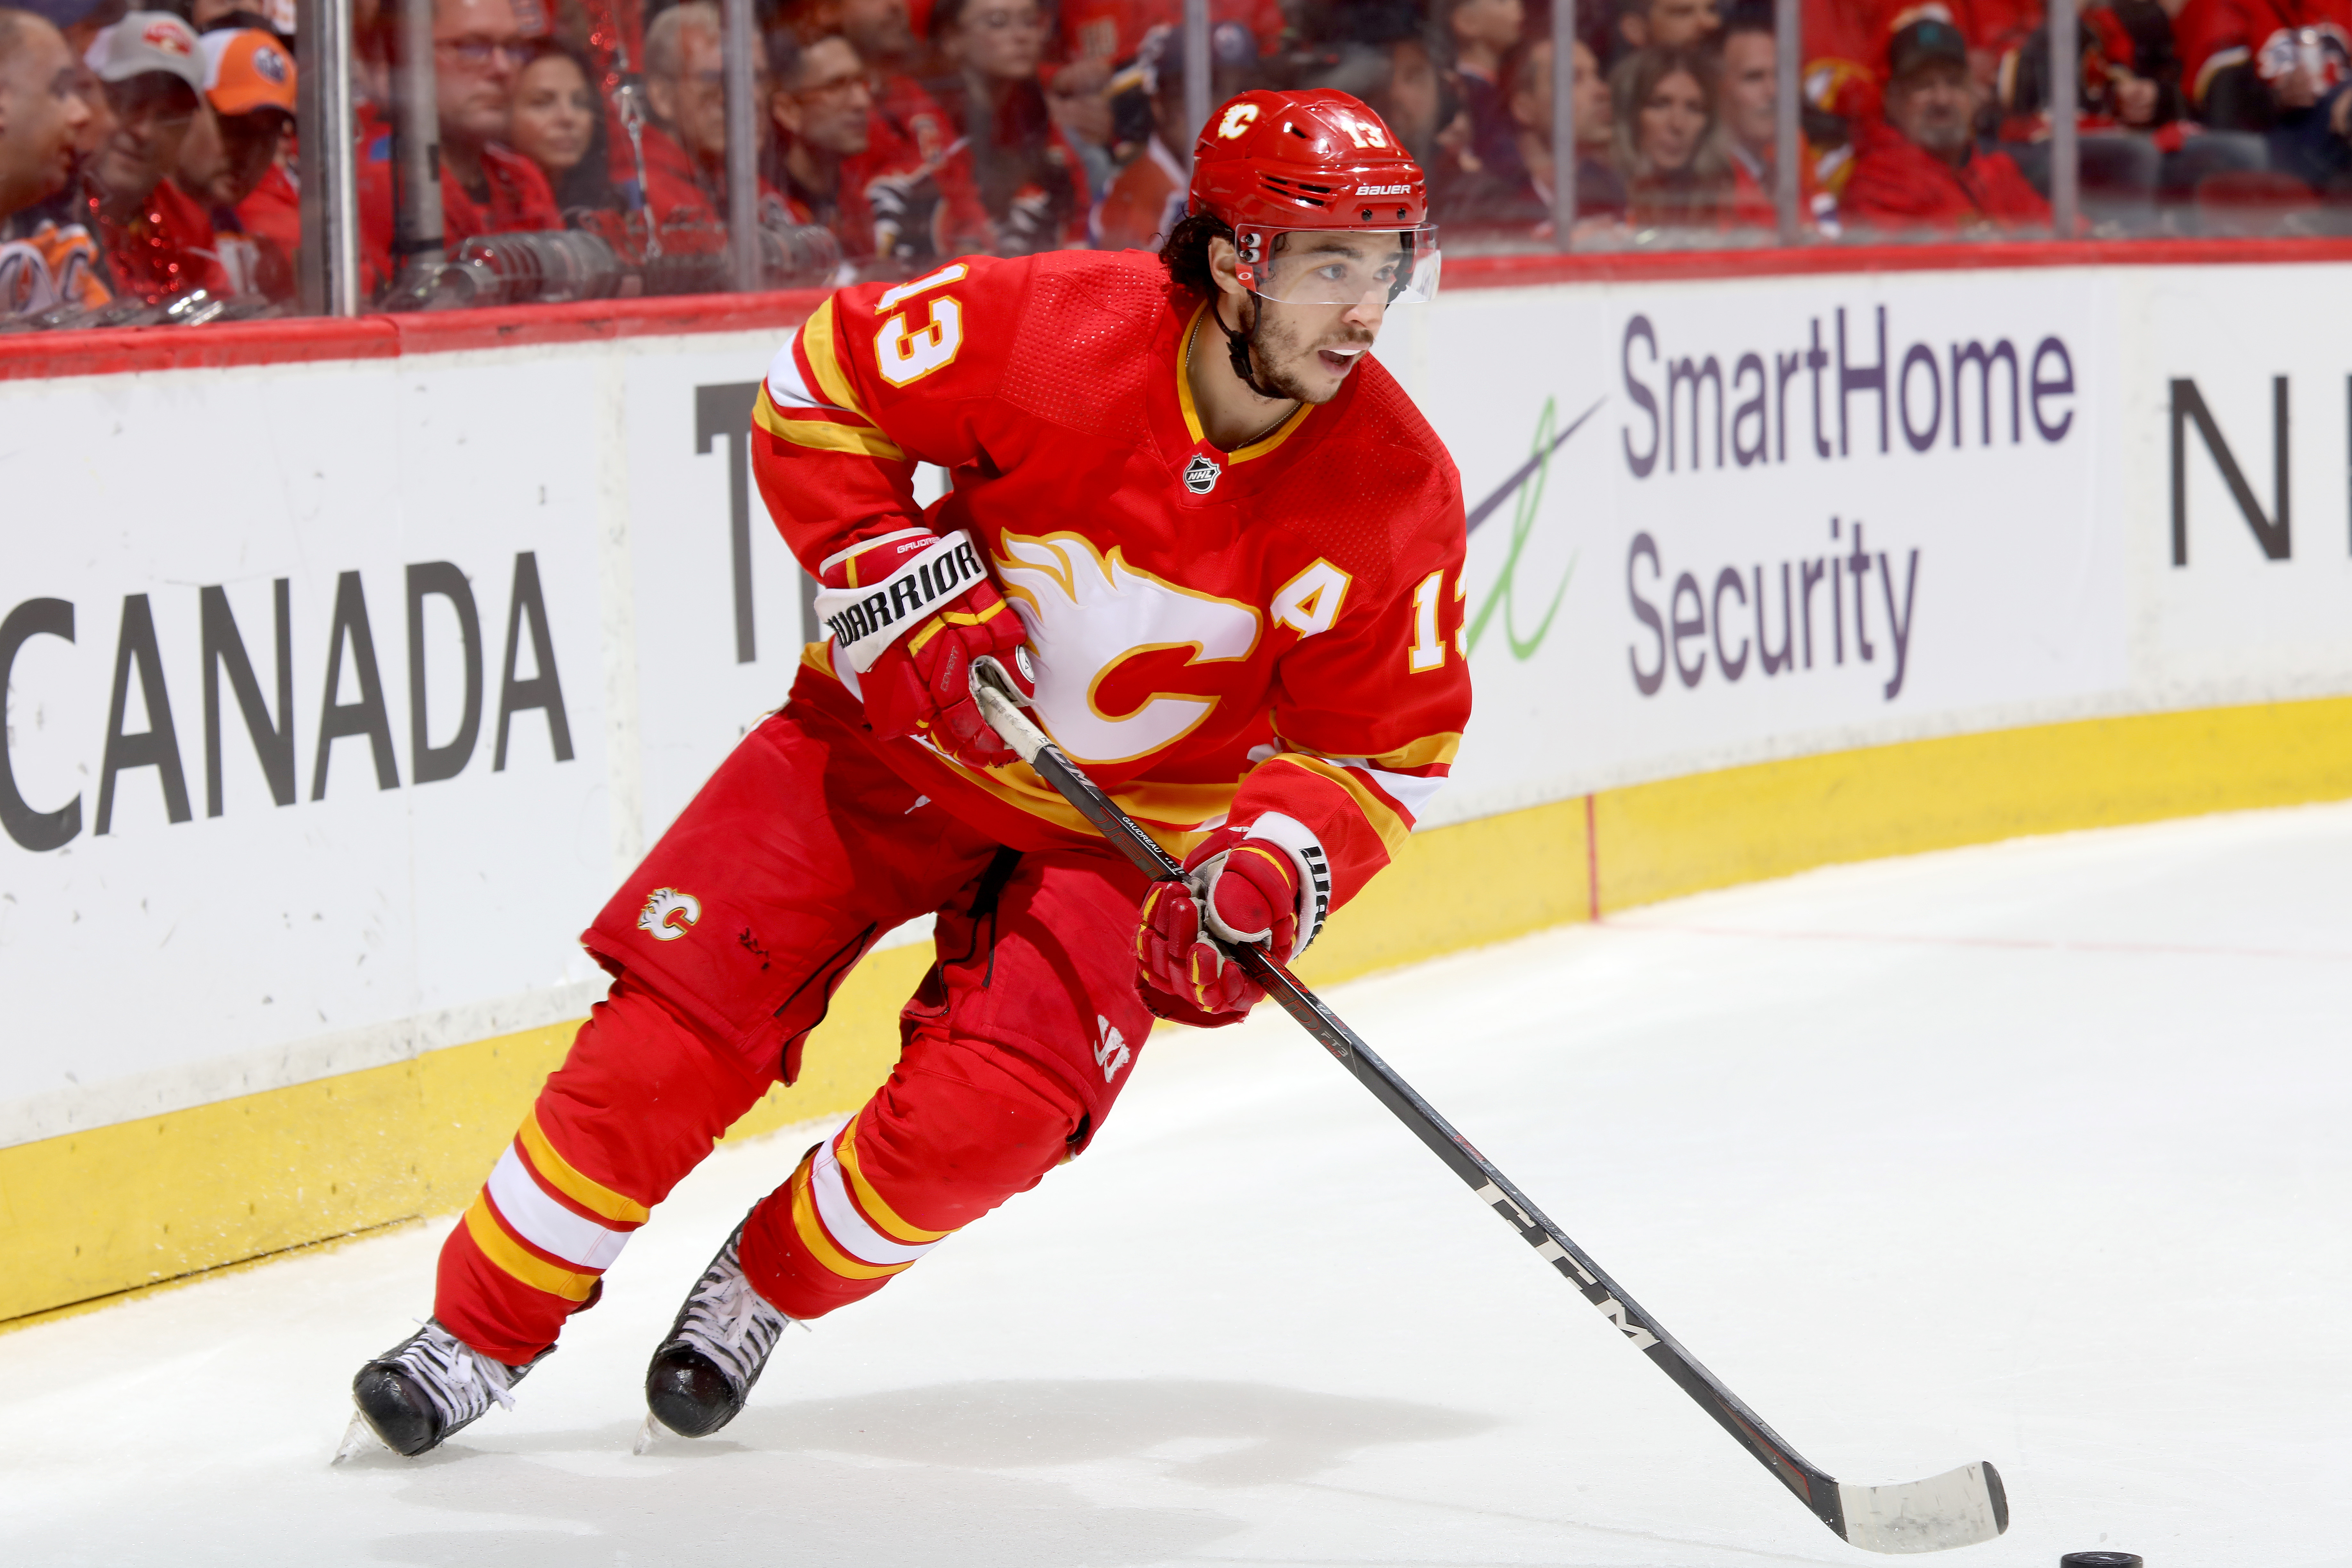 NHL All Star Rosters Announced, Johnny Gaudreau Is In For The Sixth Time -  Matchsticks and Gasoline